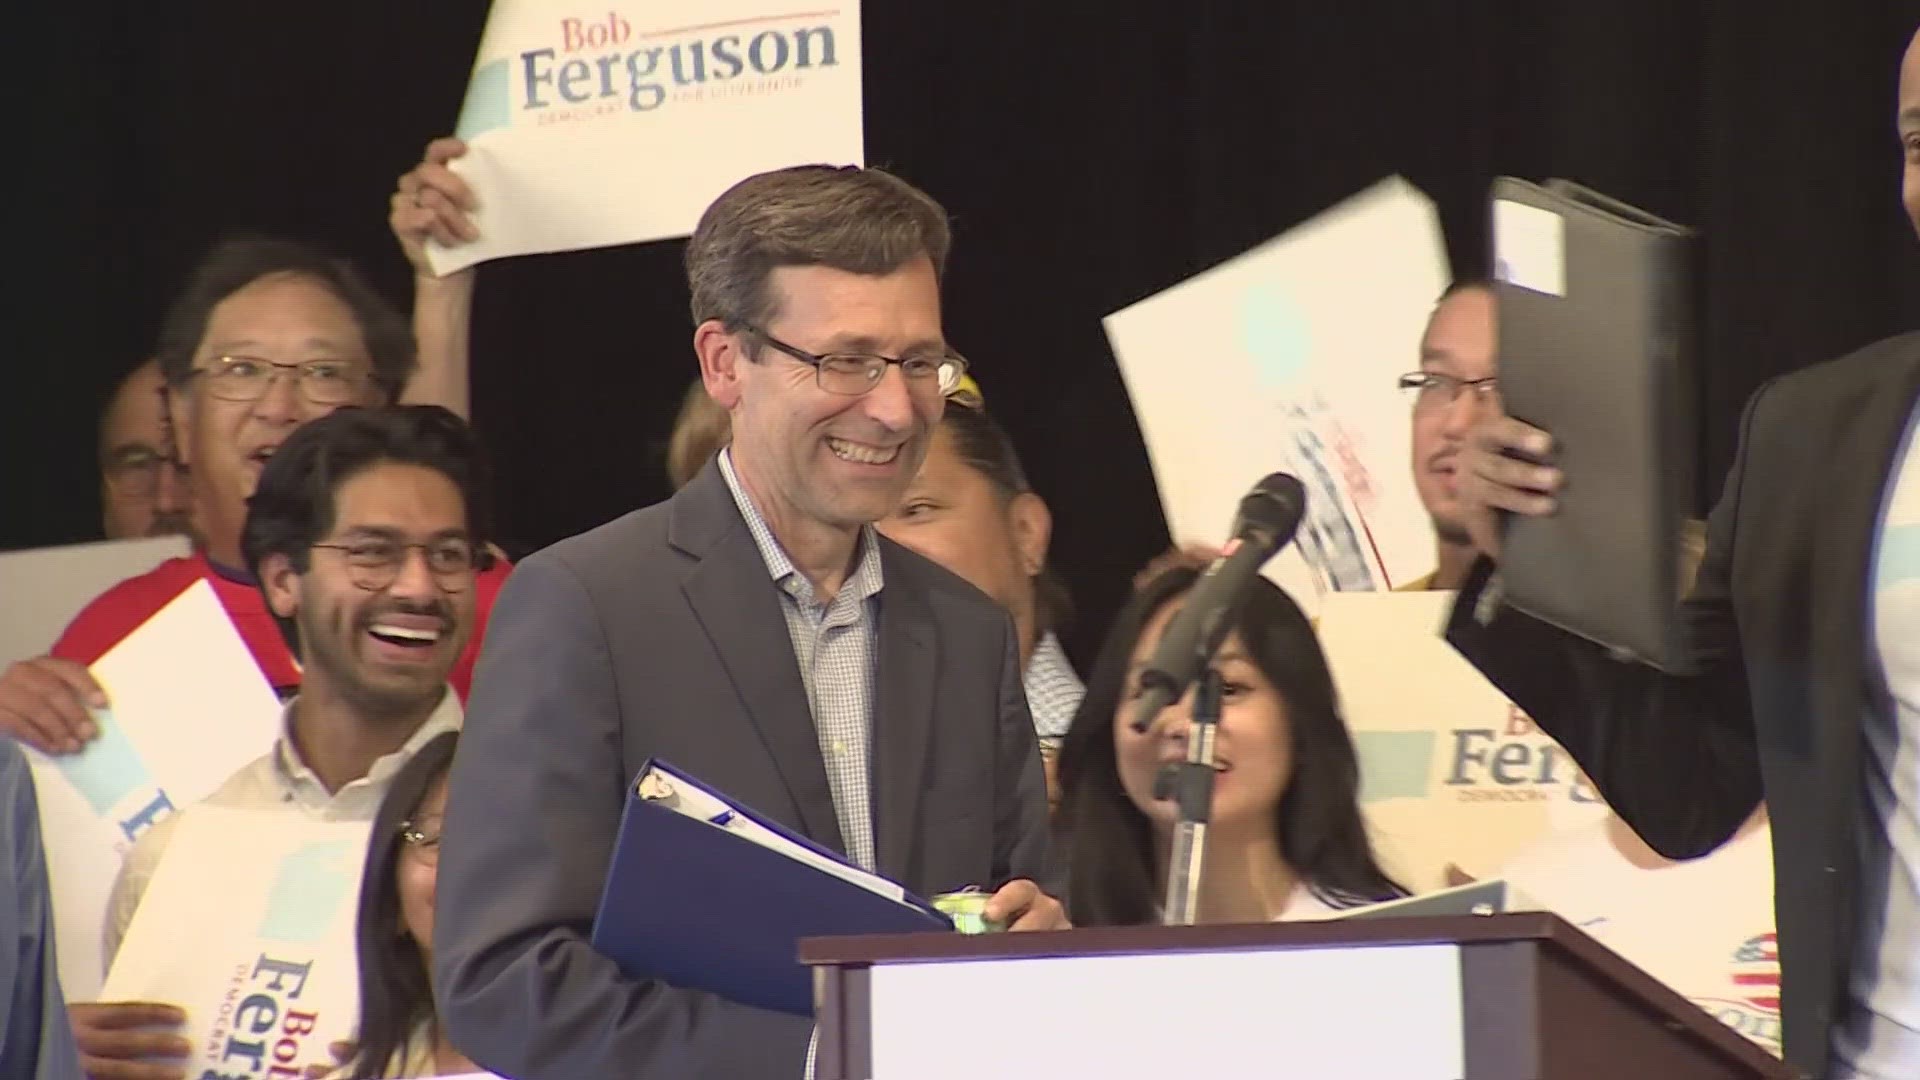 Ferguson, with the recent endorsement of Gov. Jay Inslee, joins the crowd of candidates running to secure Washington's top seat.